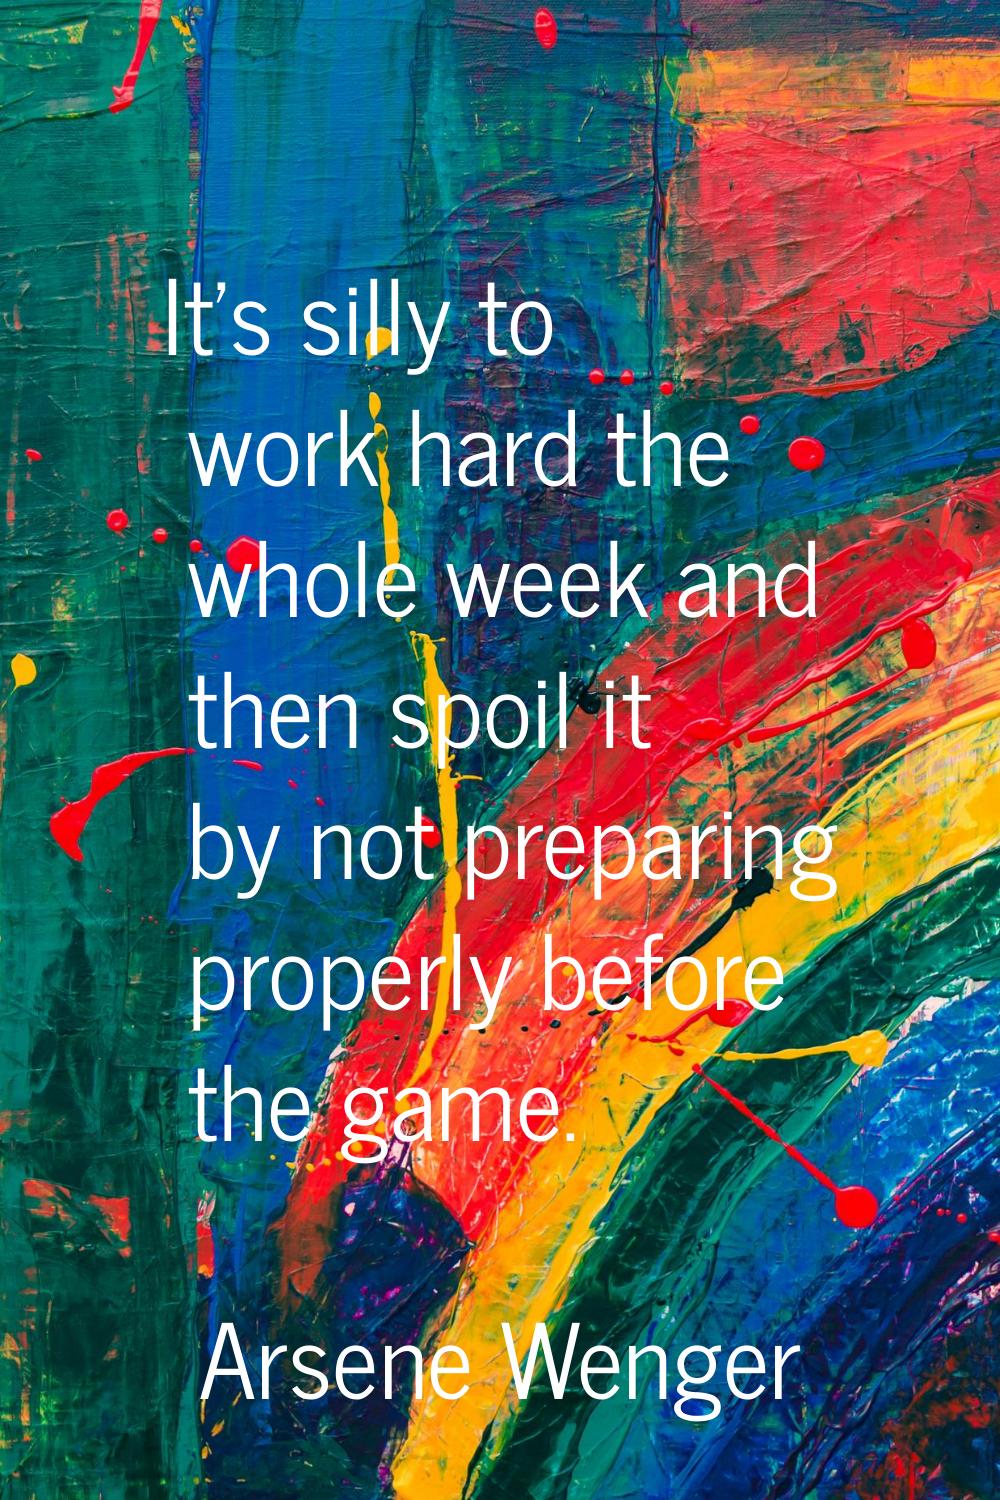 It's silly to work hard the whole week and then spoil it by not preparing properly before the game.